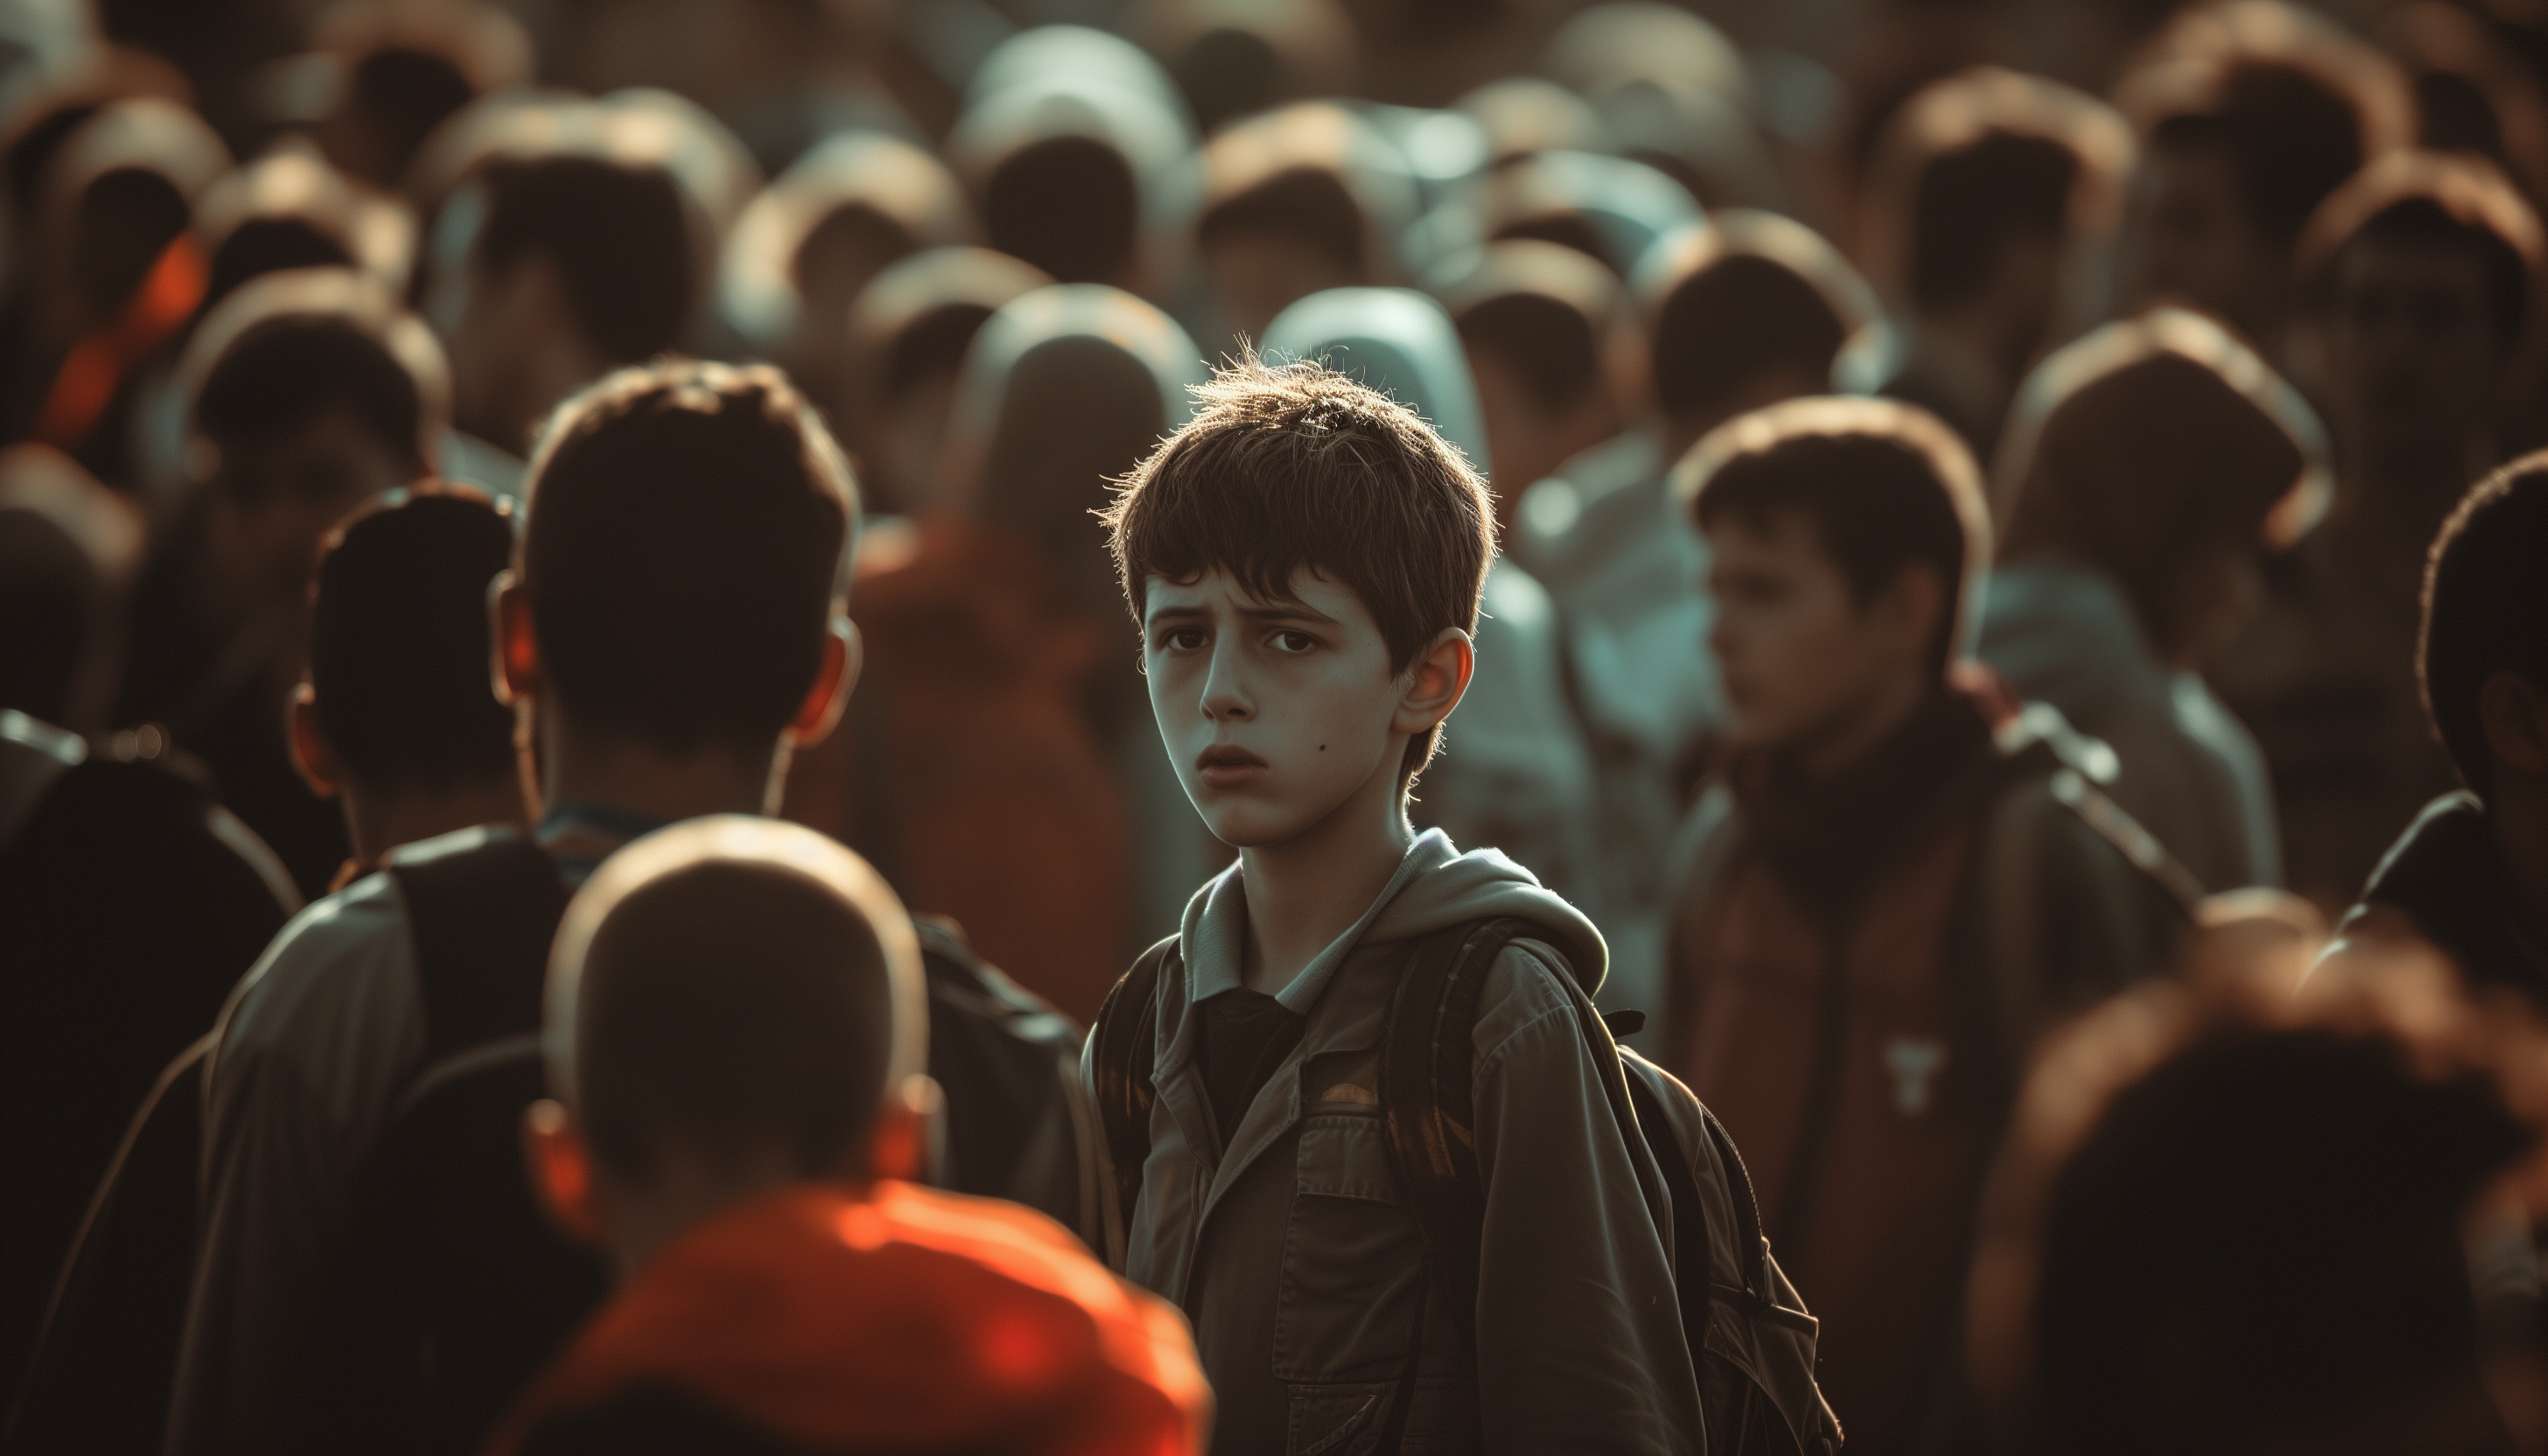 A boy looks lost in a crowd. His face is turned to us while the crowd is turned away.